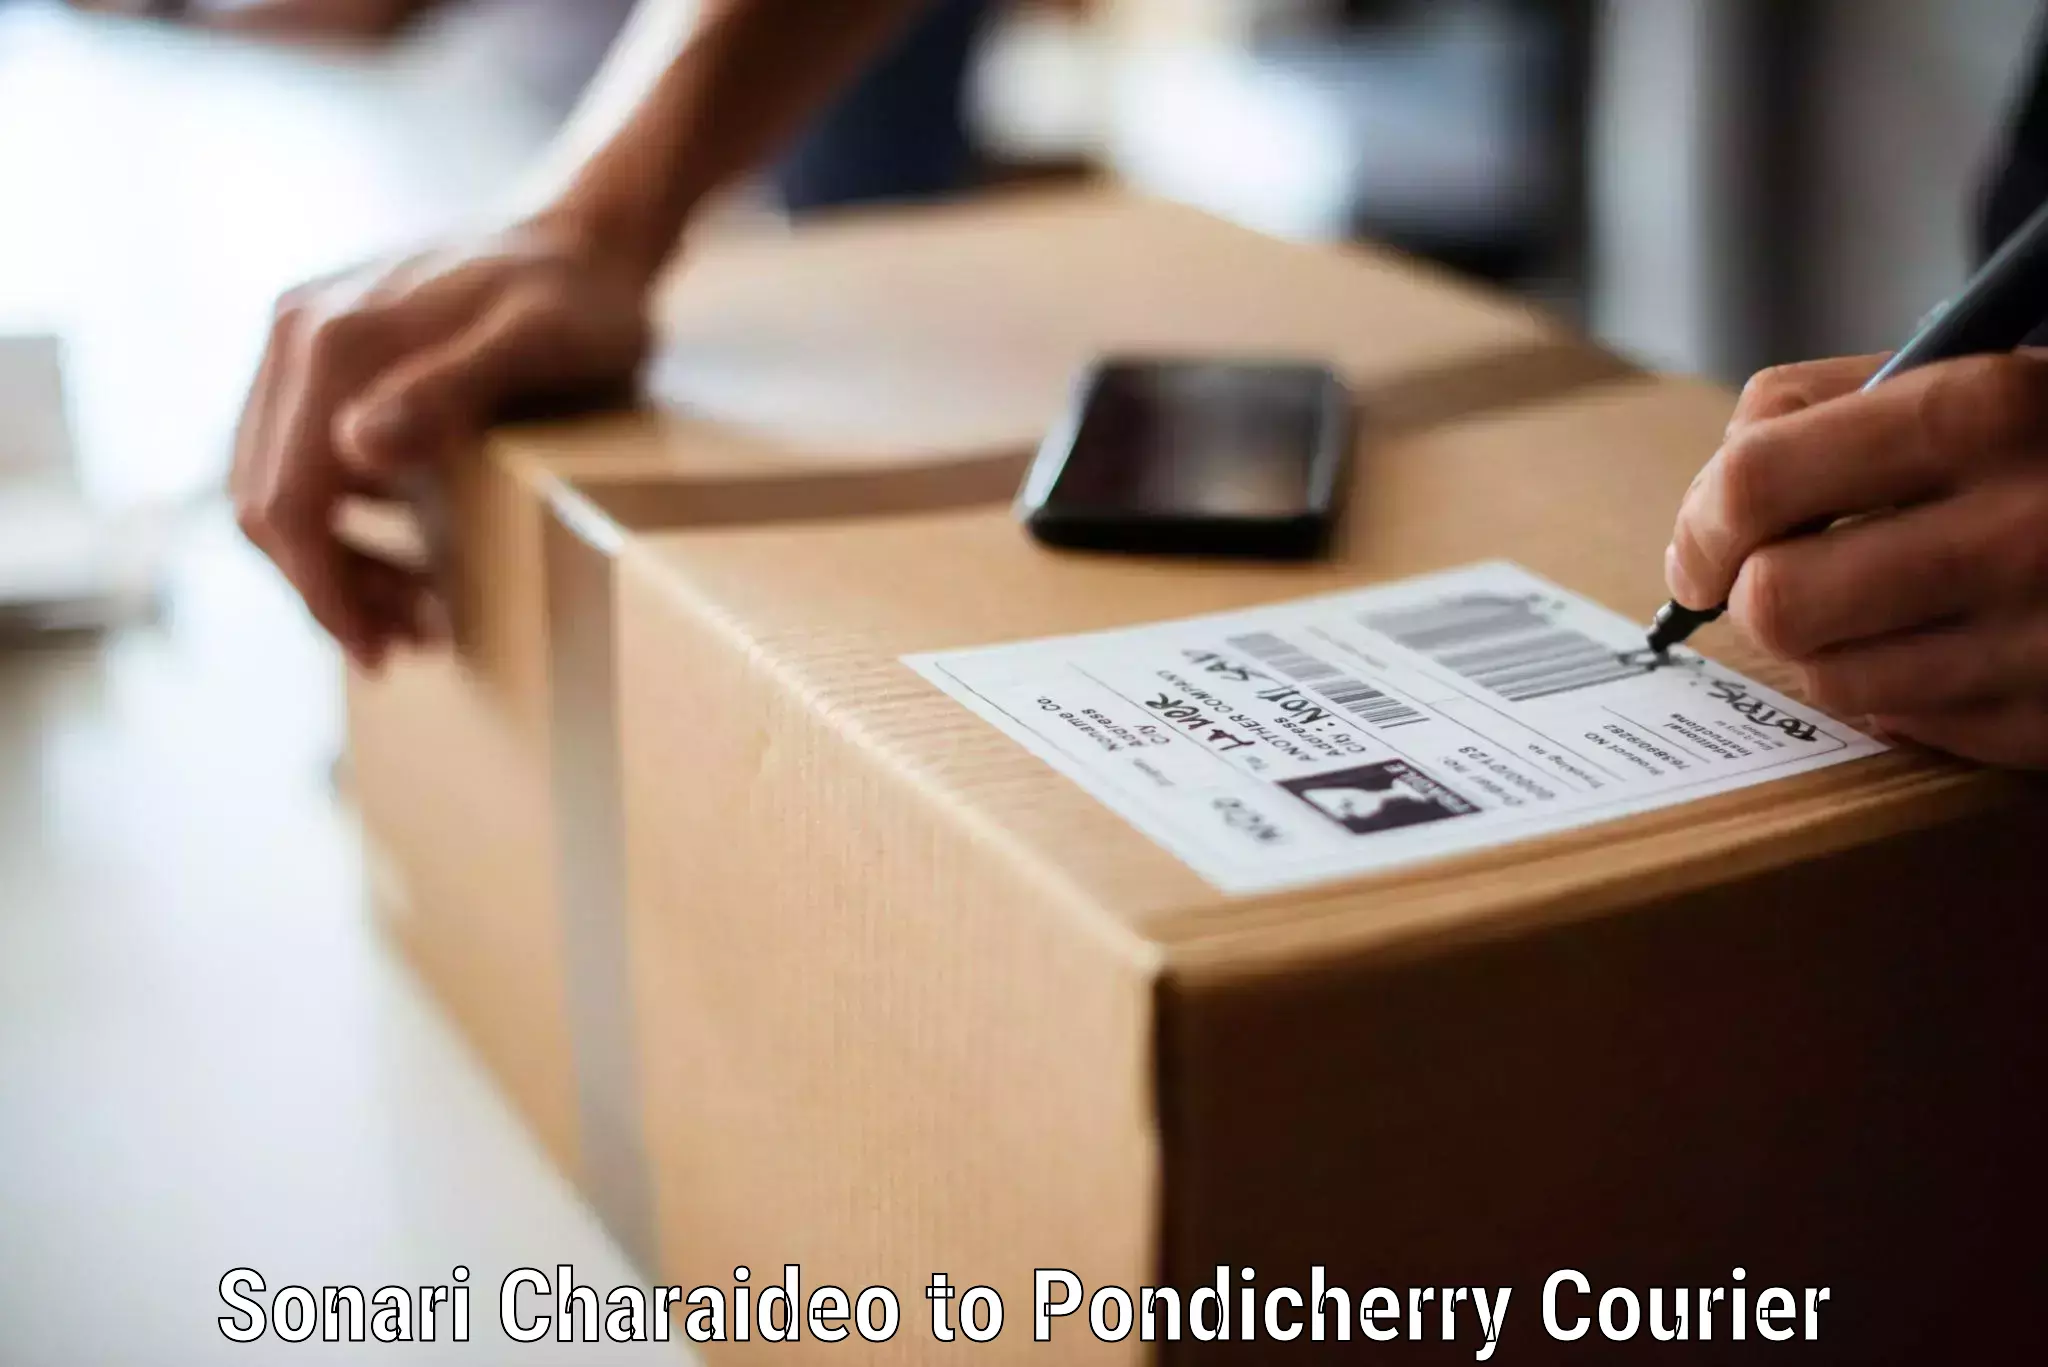 Efficient packing and moving in Sonari Charaideo to Pondicherry